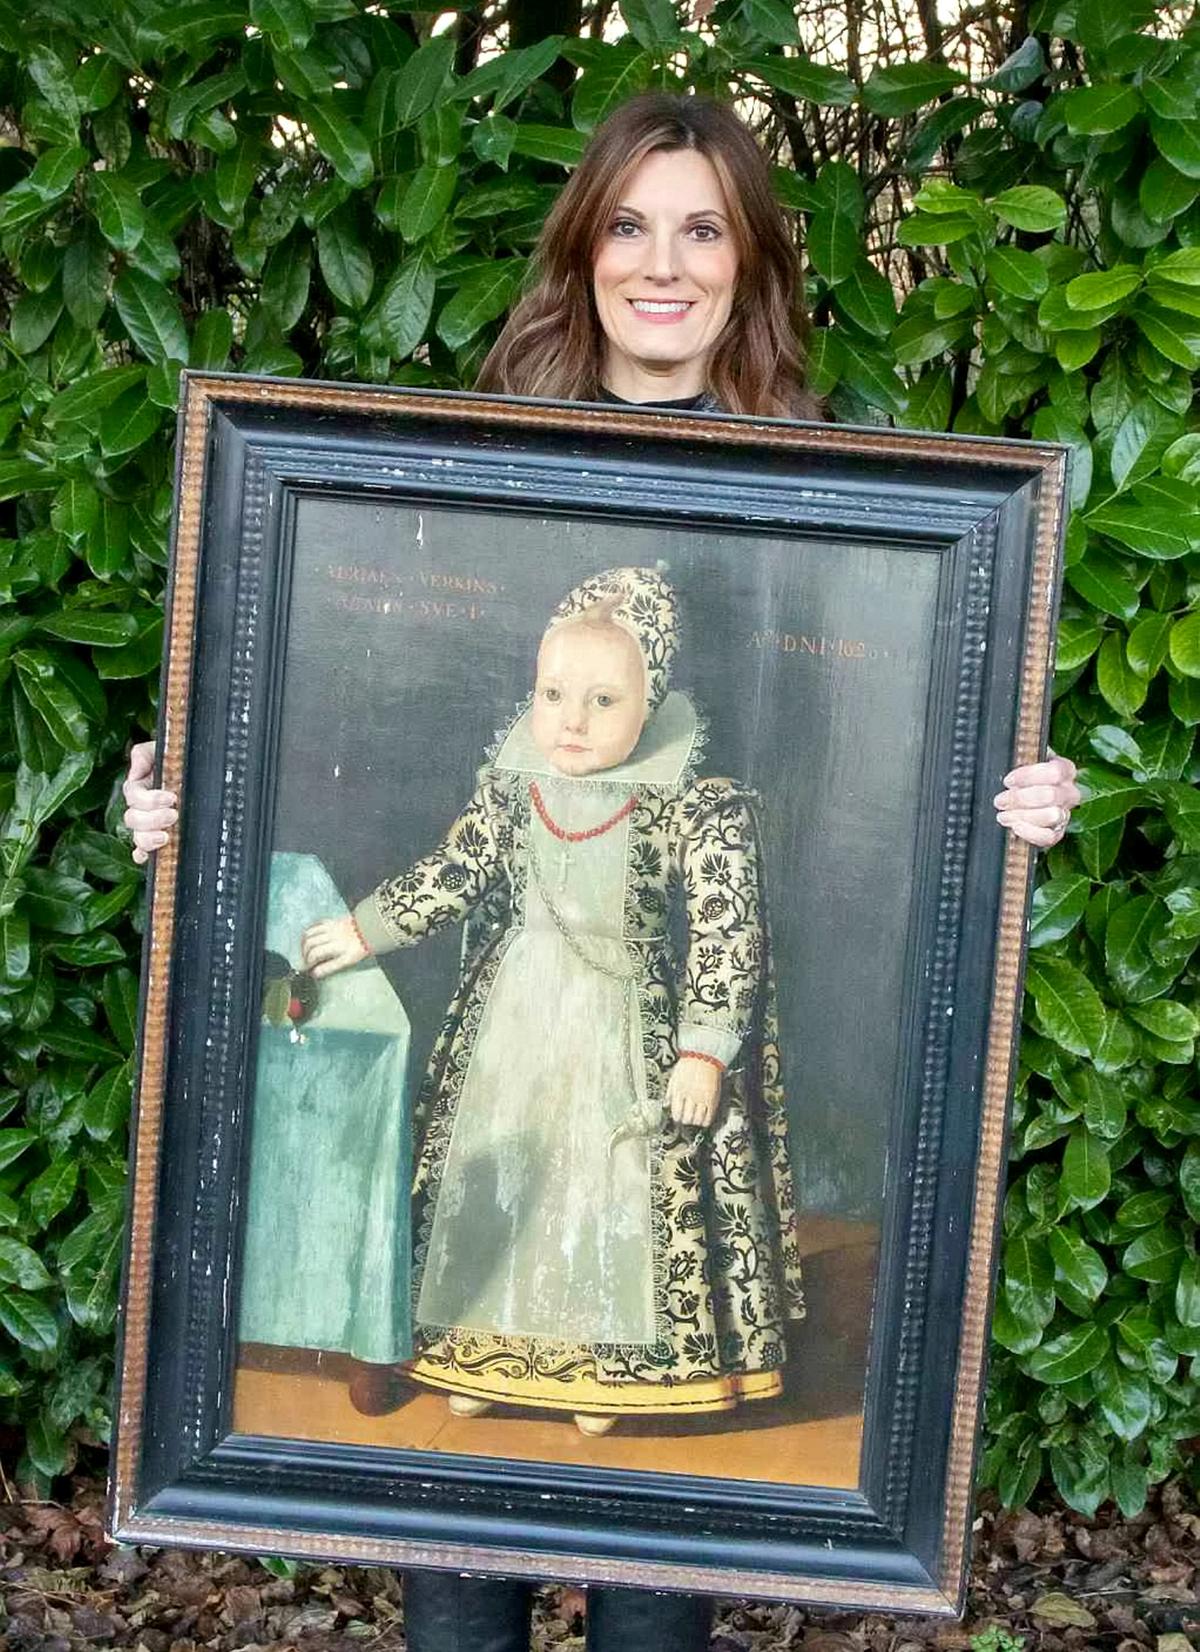 Helen Smith, of Hansons, with the portrait of a "miniature adult" in an elaborate full-length gown. (SWNS)